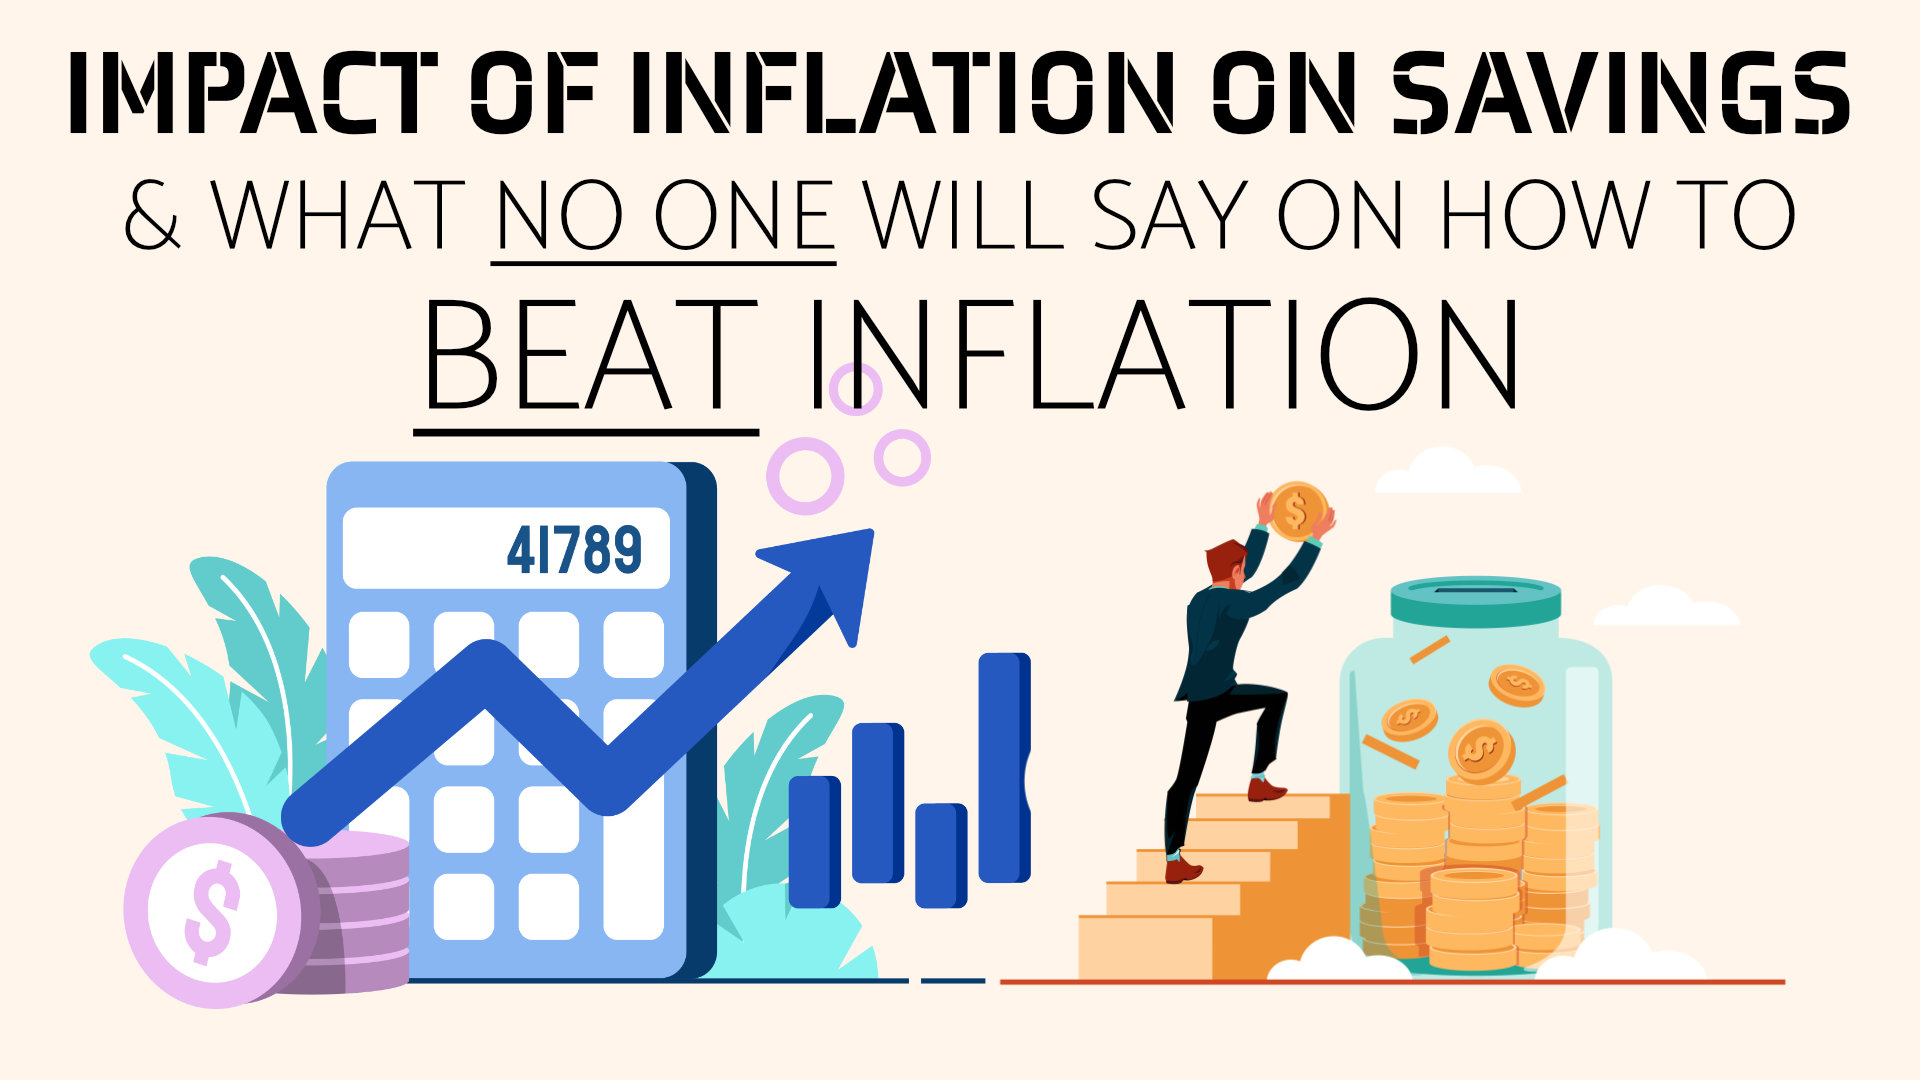 Impact of Inflation on Savings & What No One will say on How to Beat Inflation